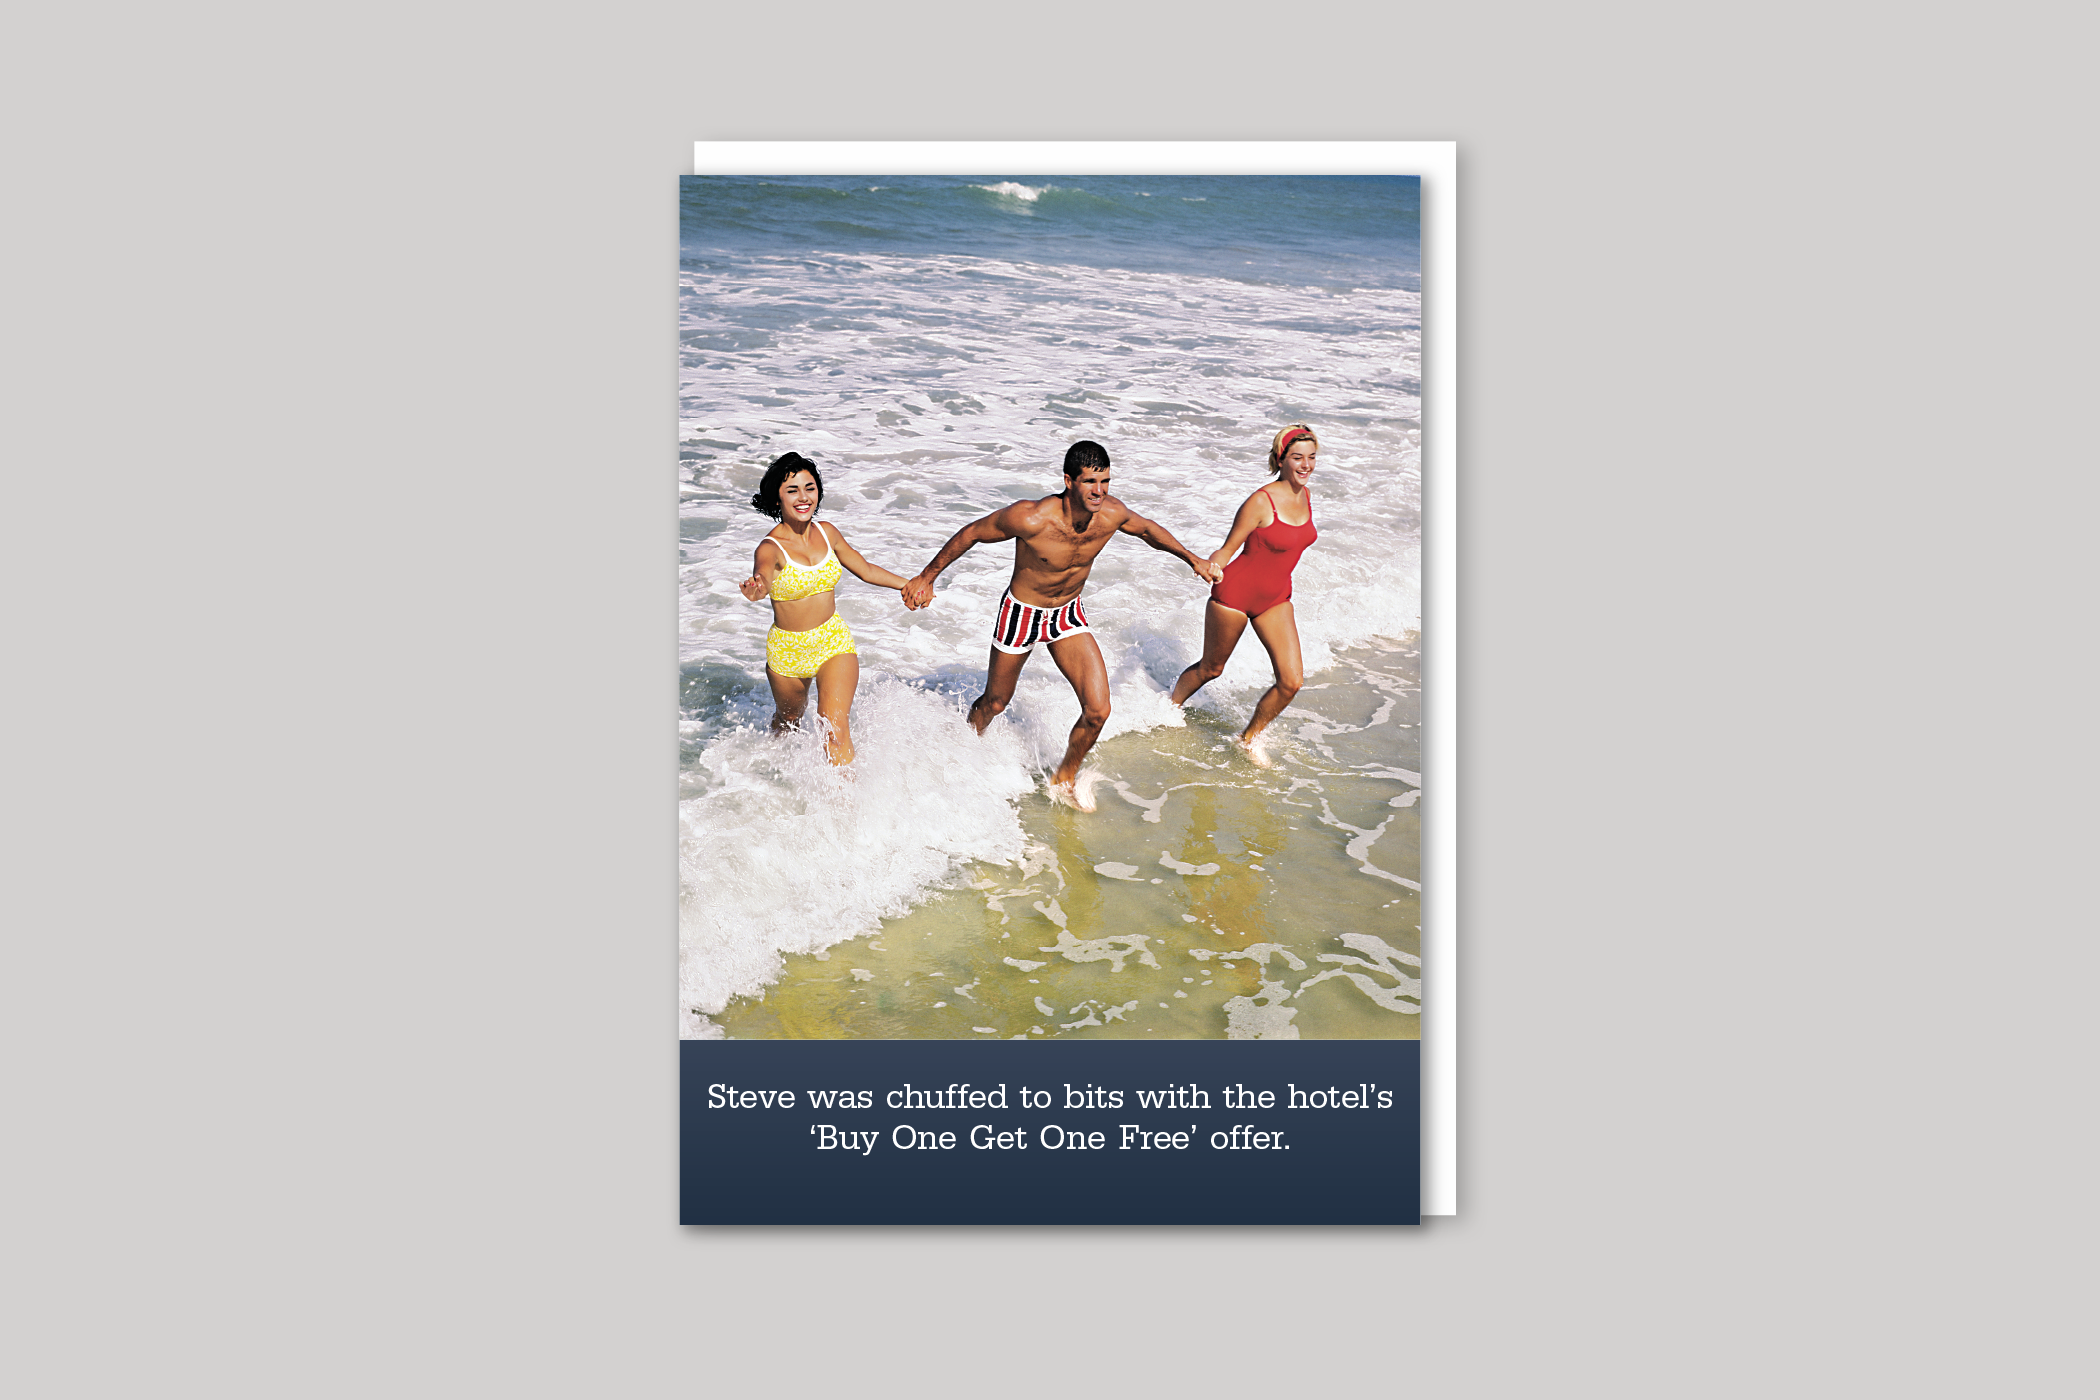 Hotel Offer from Blush humour range of greeting cards by Icon, back page.